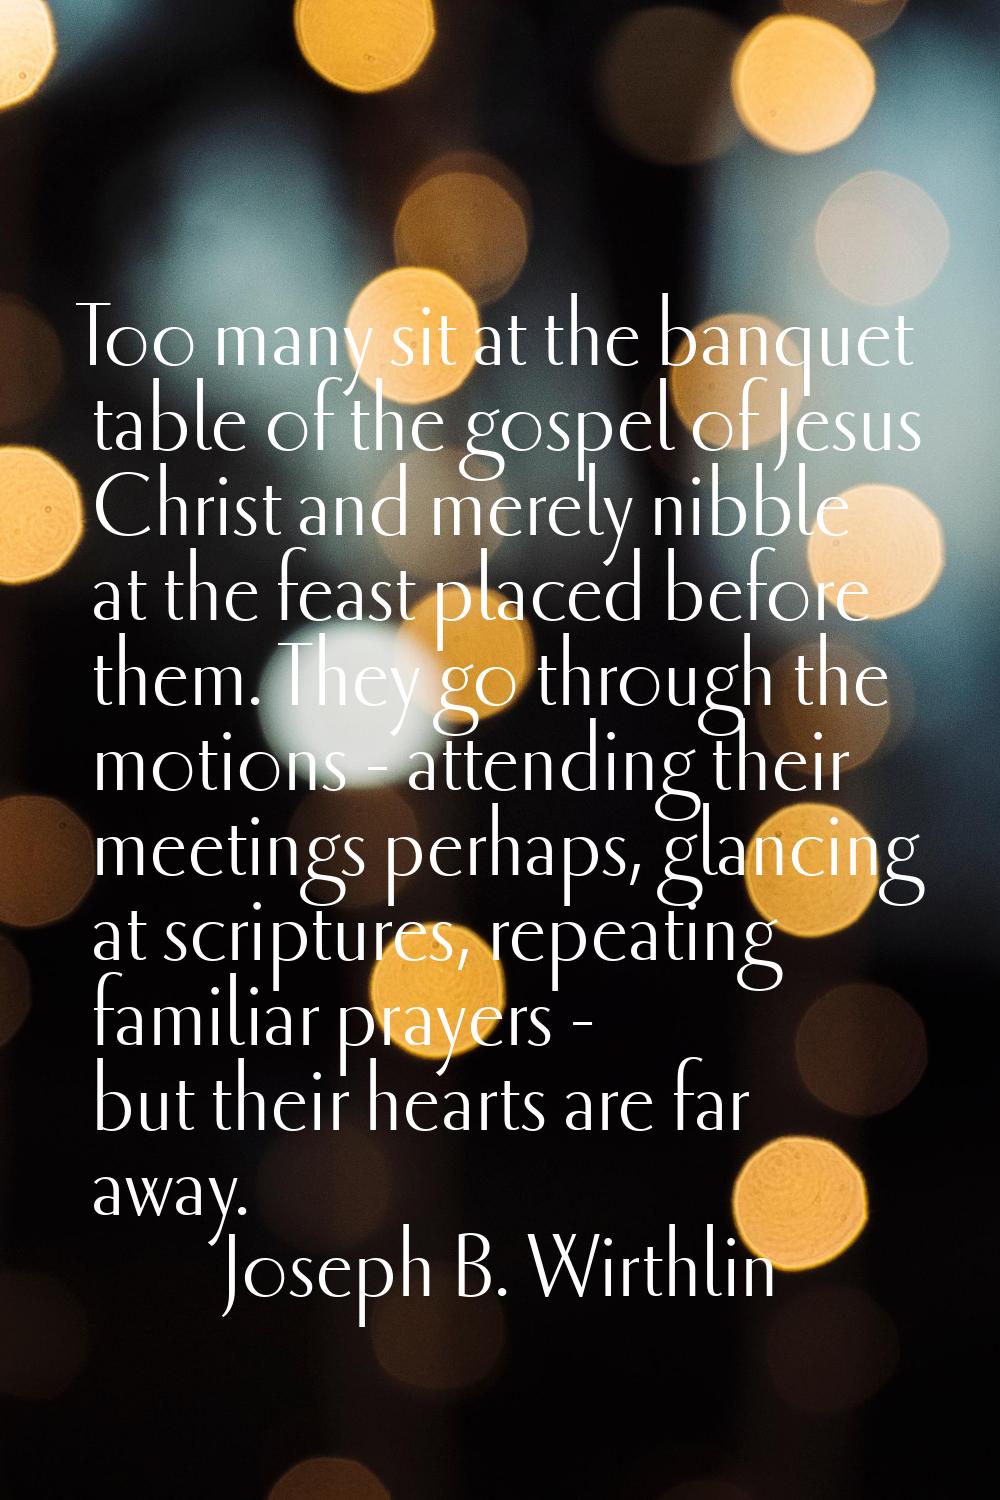 Too many sit at the banquet table of the gospel of Jesus Christ and merely nibble at the feast plac